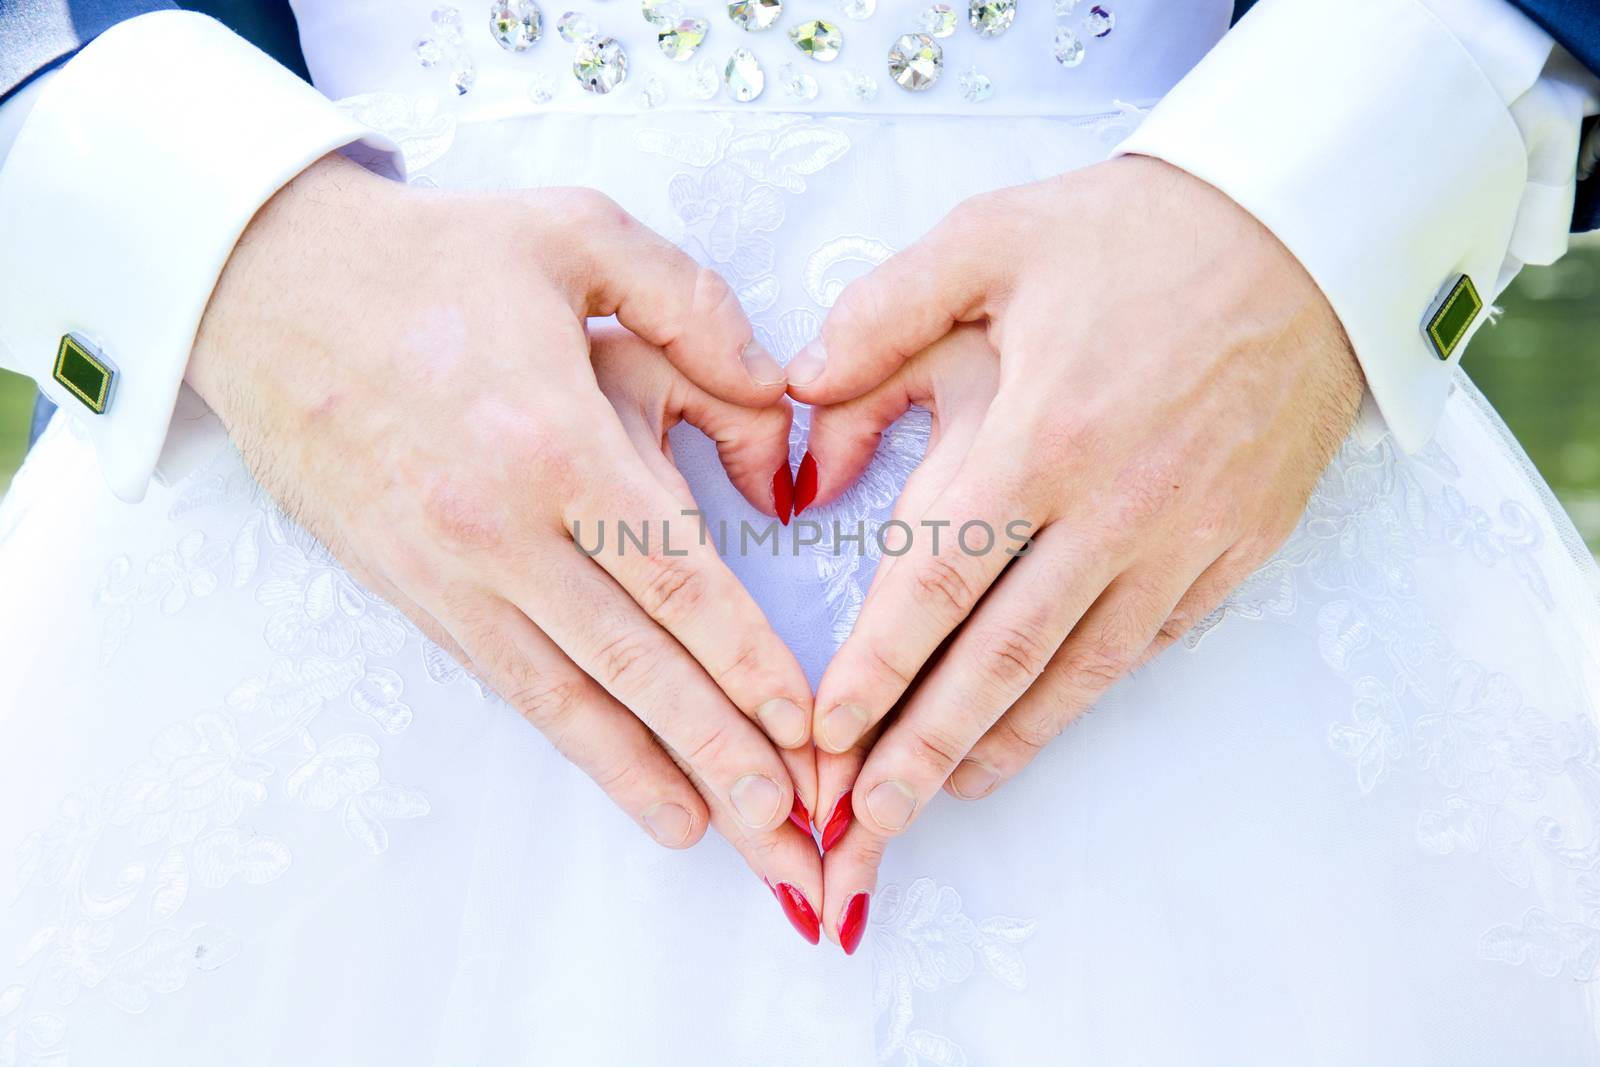 Bride and groom hold hands in love heart shape. Marriage and wedding concept image.